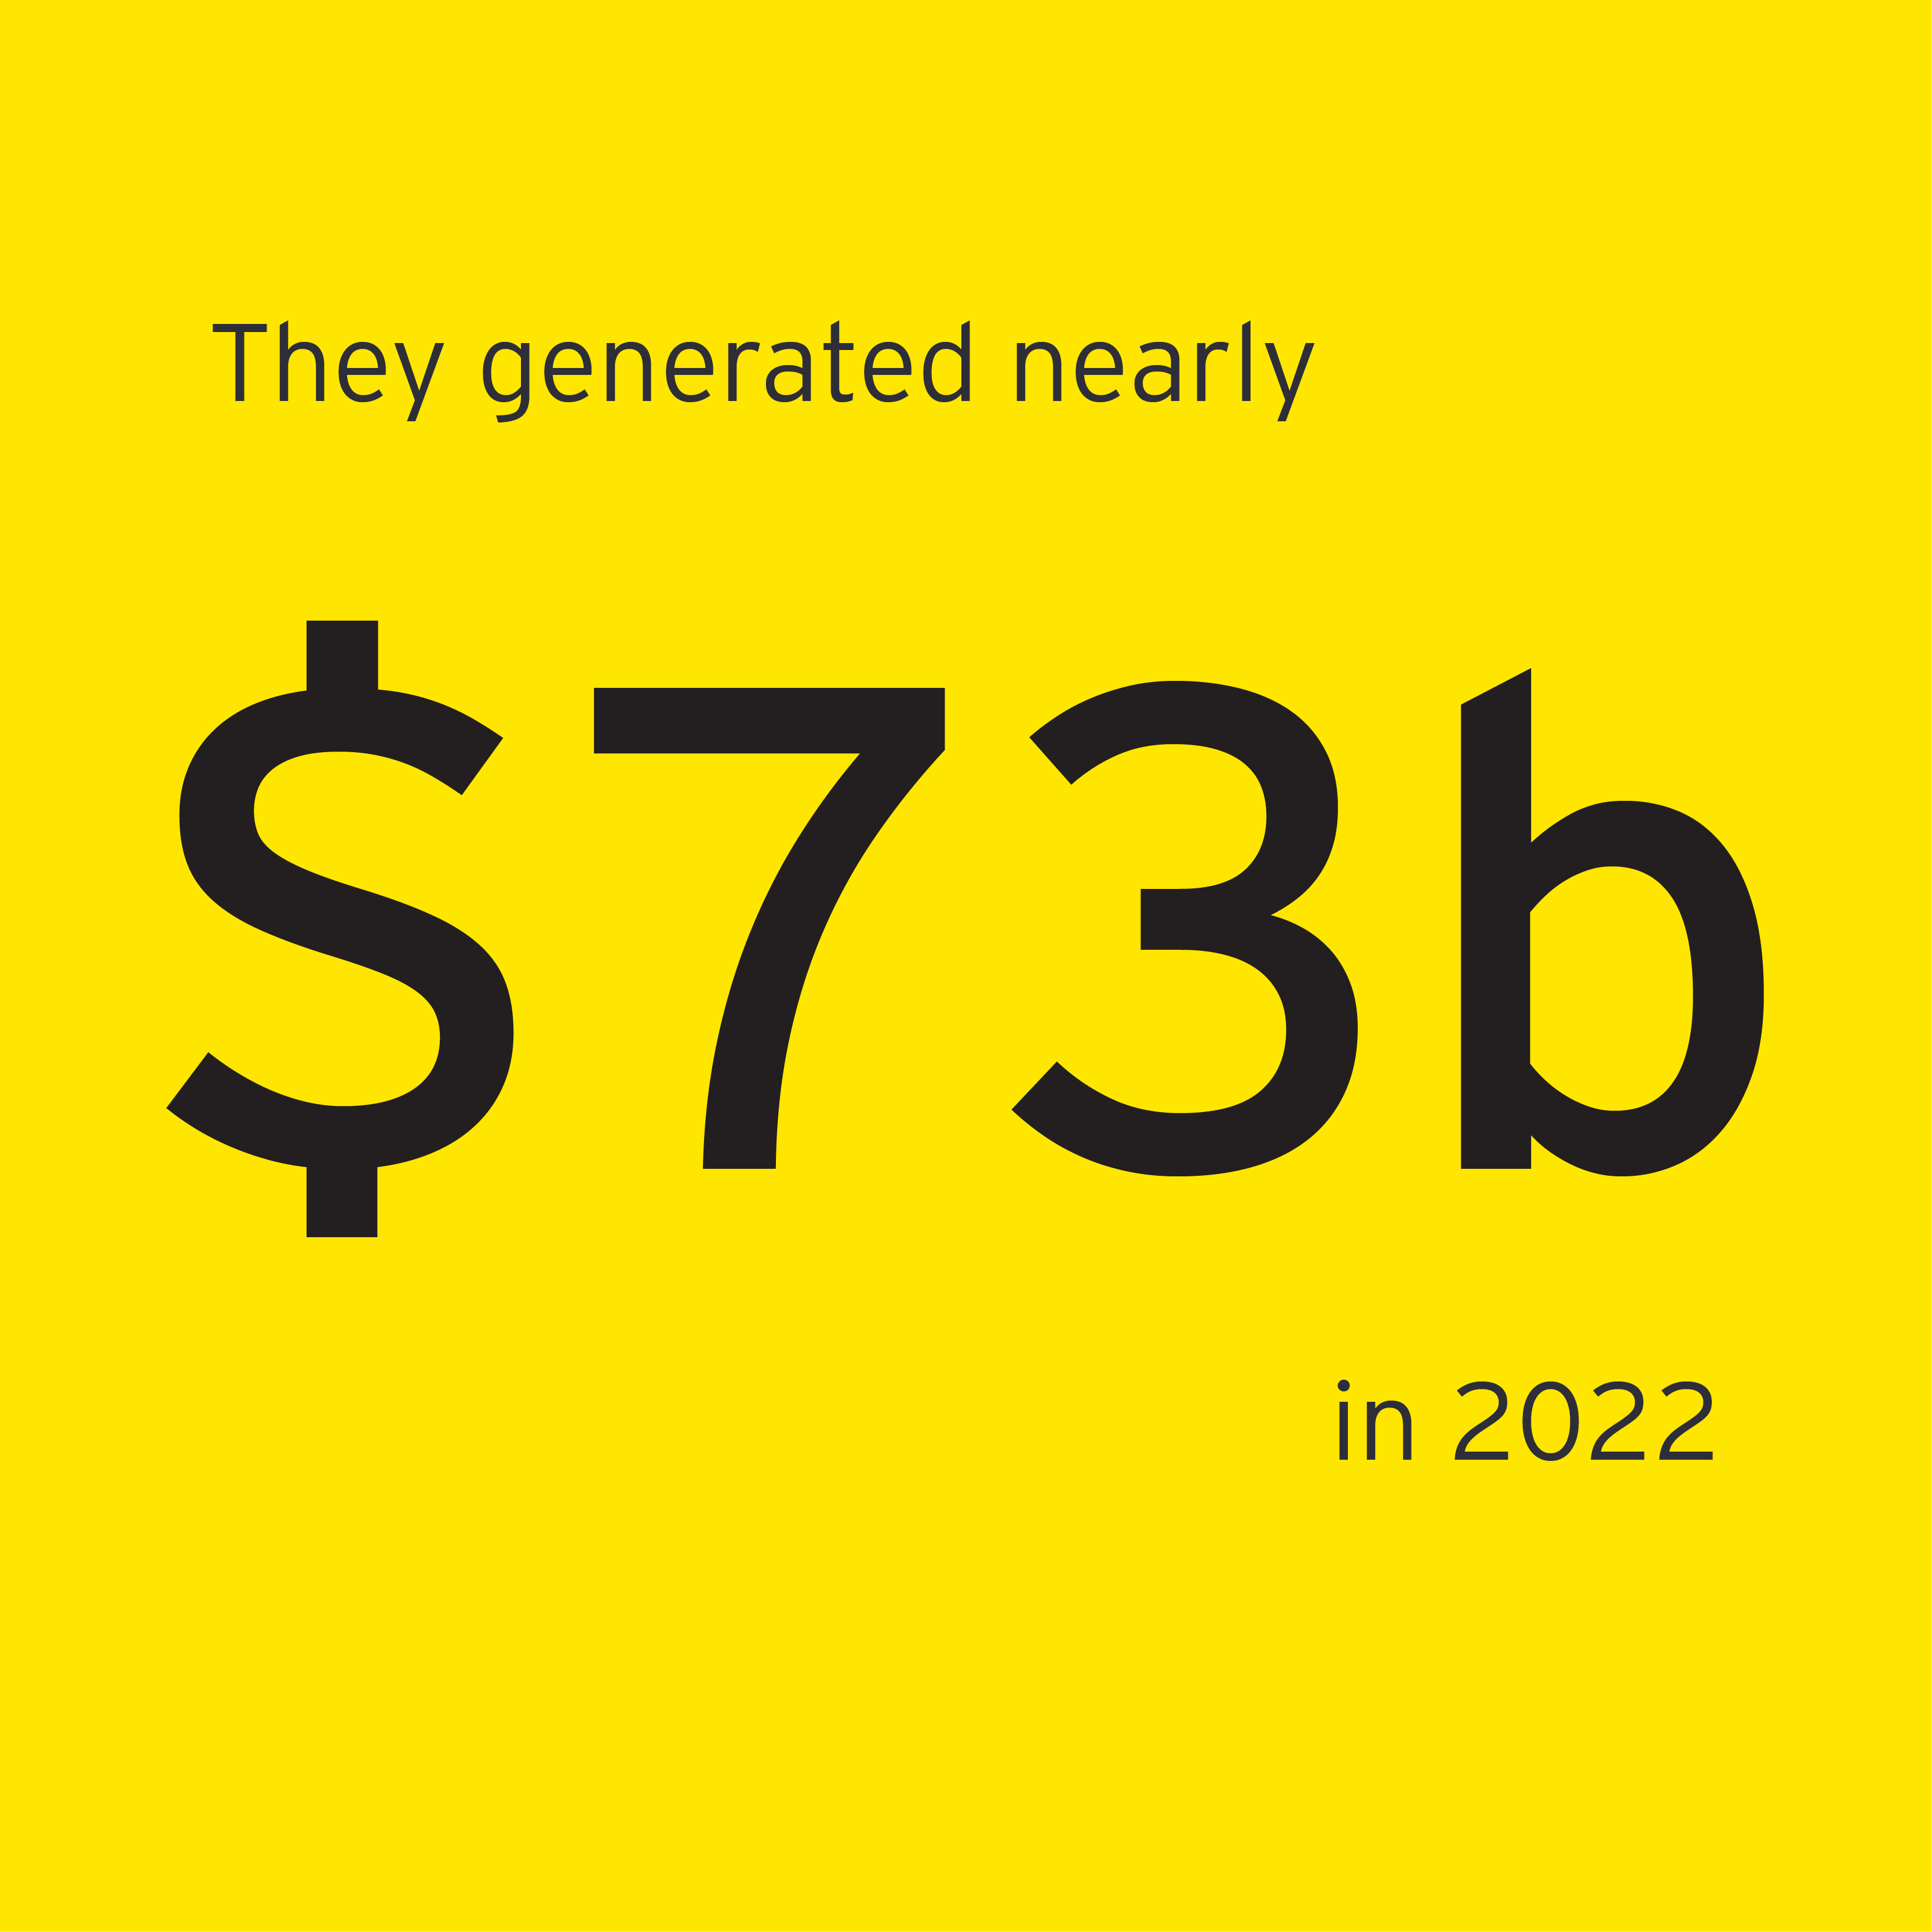 They generated nearly $73b in 2022